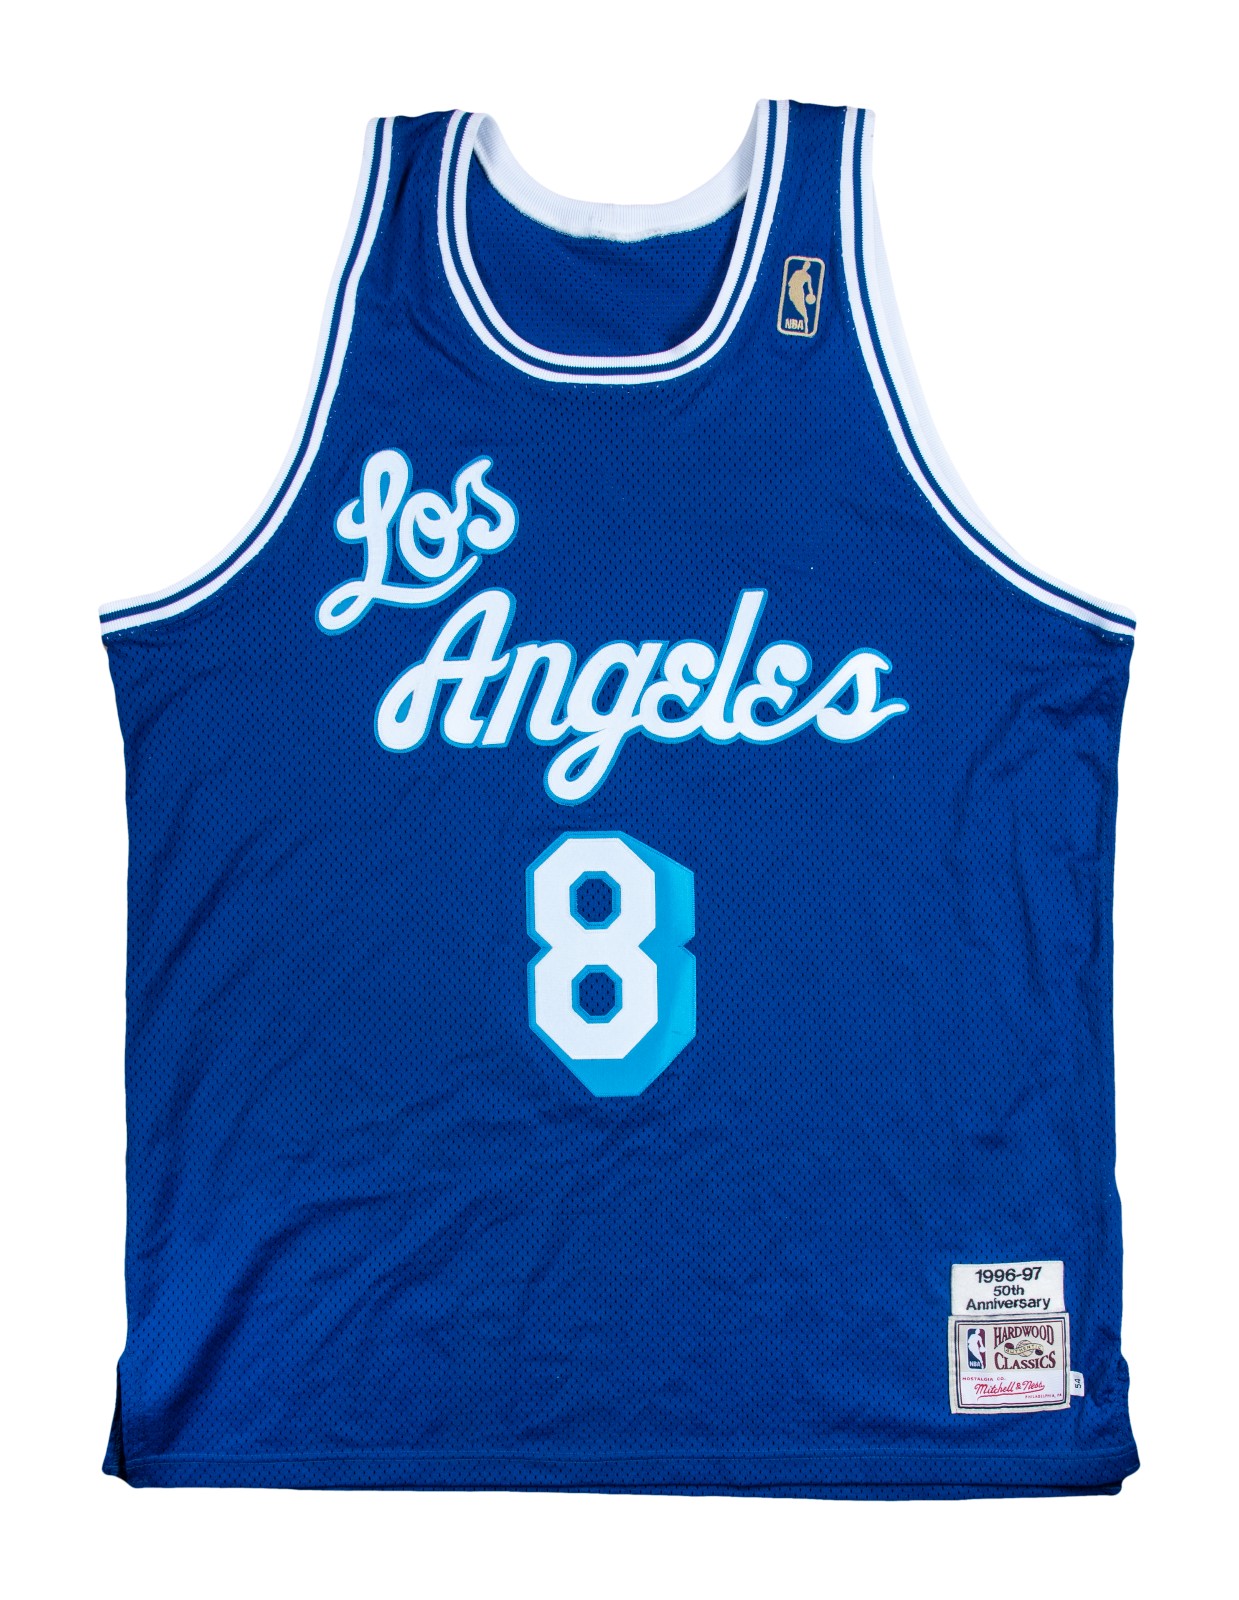 A leak shows the Lakers will wear throwback blue jerseys next